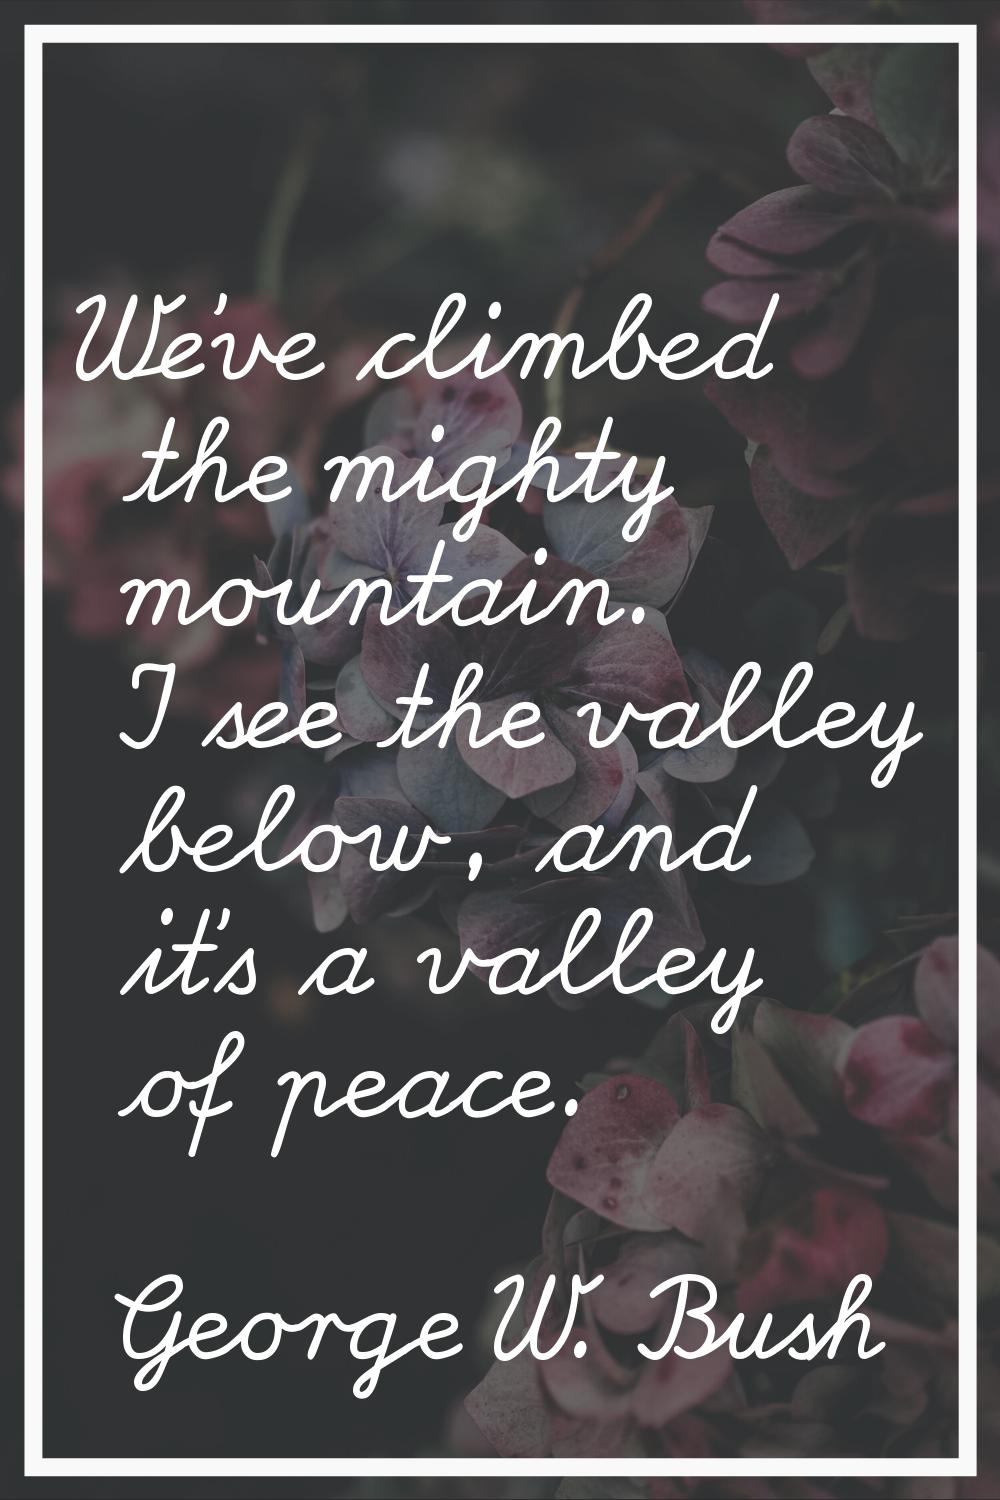 We've climbed the mighty mountain. I see the valley below, and it's a valley of peace.